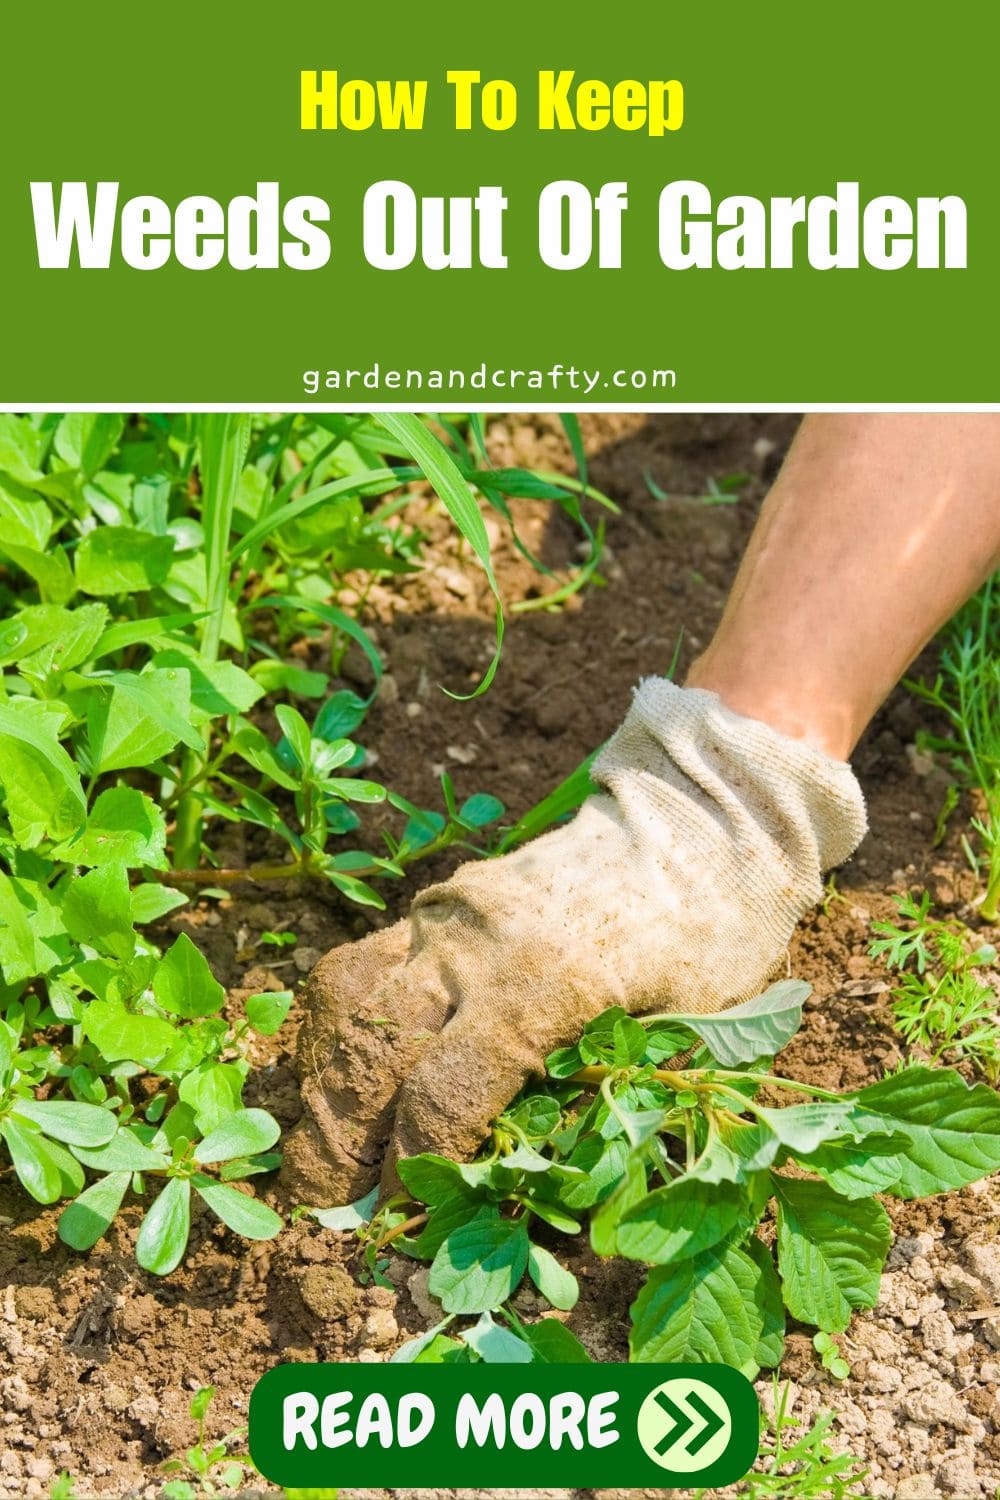 How To Keep Weeds Out Of Garden